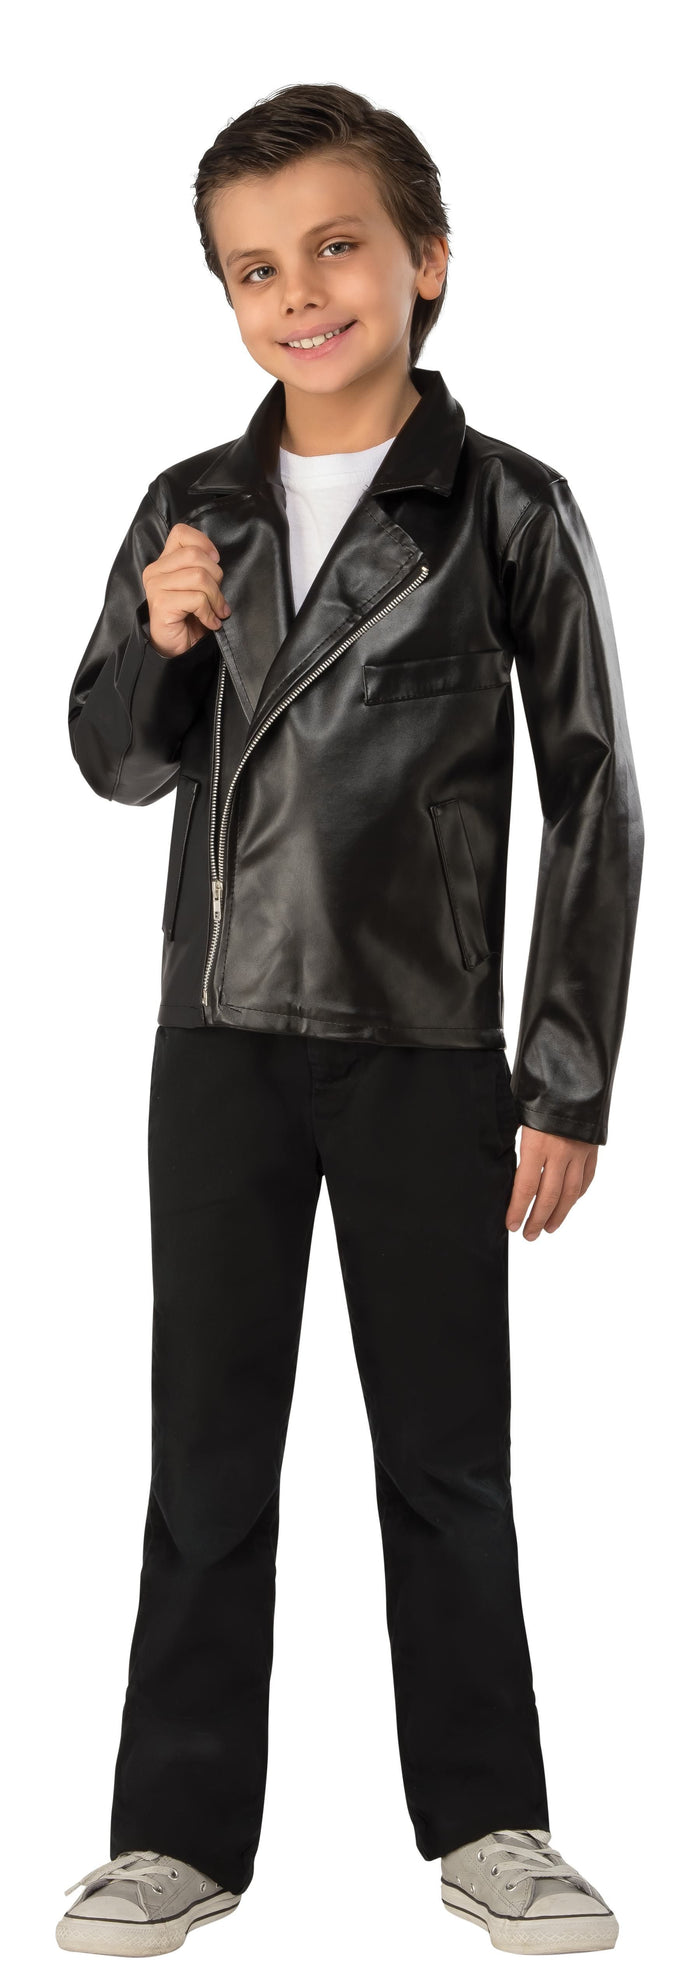 T-Birds Jacket for Kids - Grease